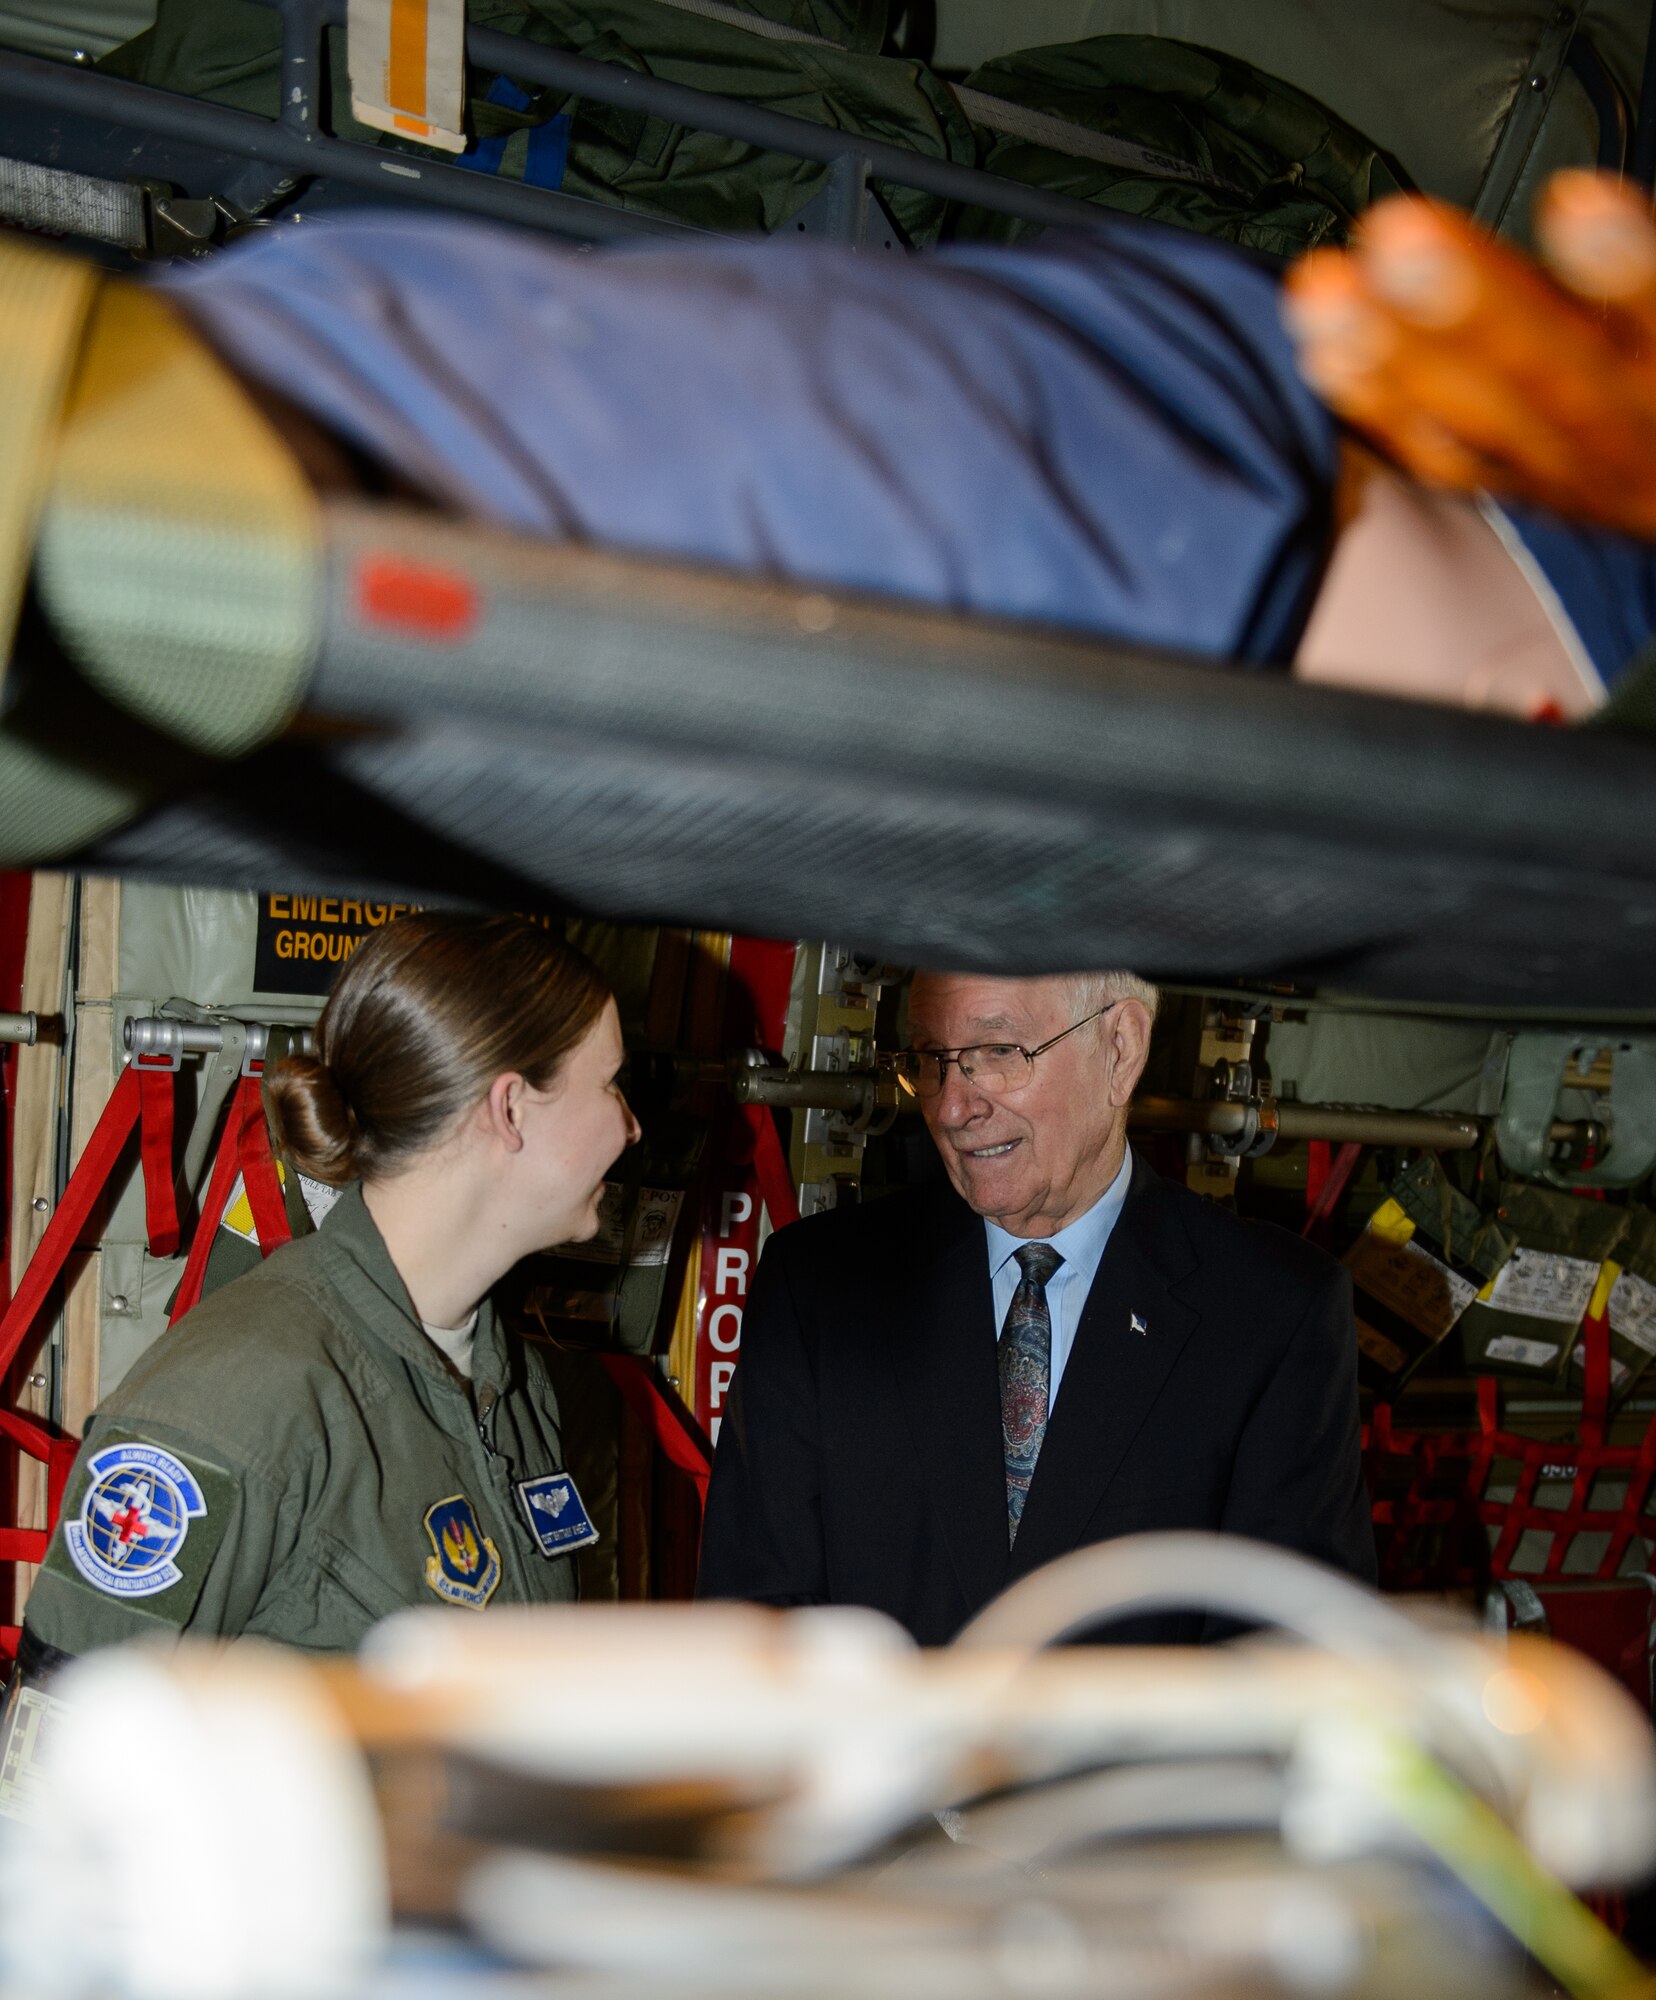 Sam E. Parish, retired Chief Master Sergeant of the Air Force, right, speaks with Staff Sgt. Brittany Wheat, 86th Aeromedical Evacuation Squadron aeromedical technician, during a base visit Jan. 26, 2016, at Ramstein Air Base, Germany. Airmen from the 86th Airlift Wing demonstrated the wing’s capabilities prior to Parish guest speaking at a chief induction ceremony. The Airmen of the 86th showed Parish how they generate and employ air mobility enabling theater and strategic airpower by operating a key Air Force power projection platform at Ramstein. (U.S. Air Force photo/Staff Sgt. Armando A. Schwier-Morales)